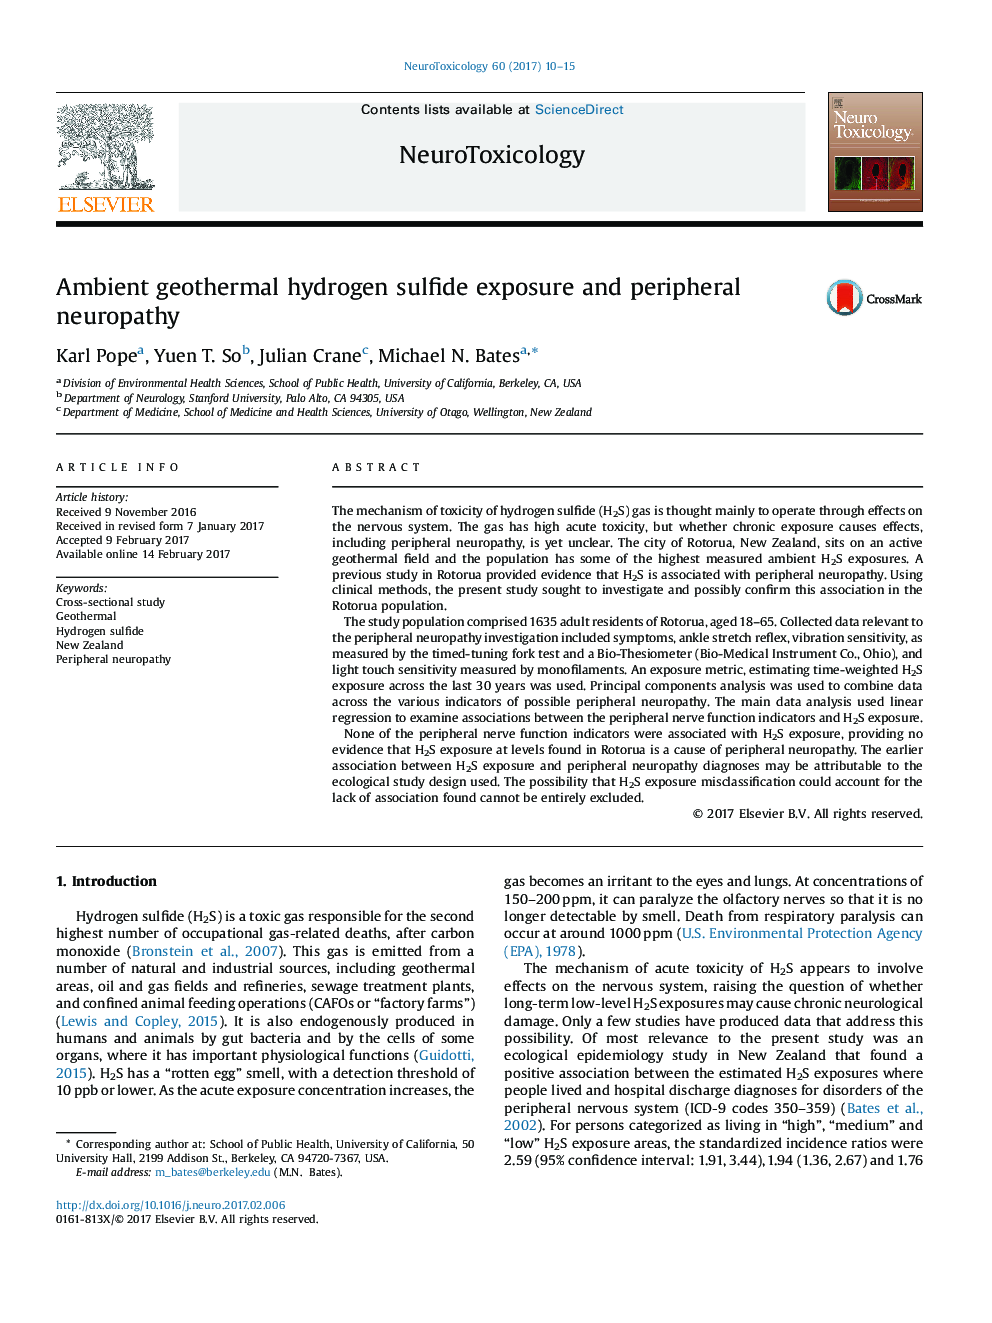 Ambient geothermal hydrogen sulfide exposure and peripheral neuropathy